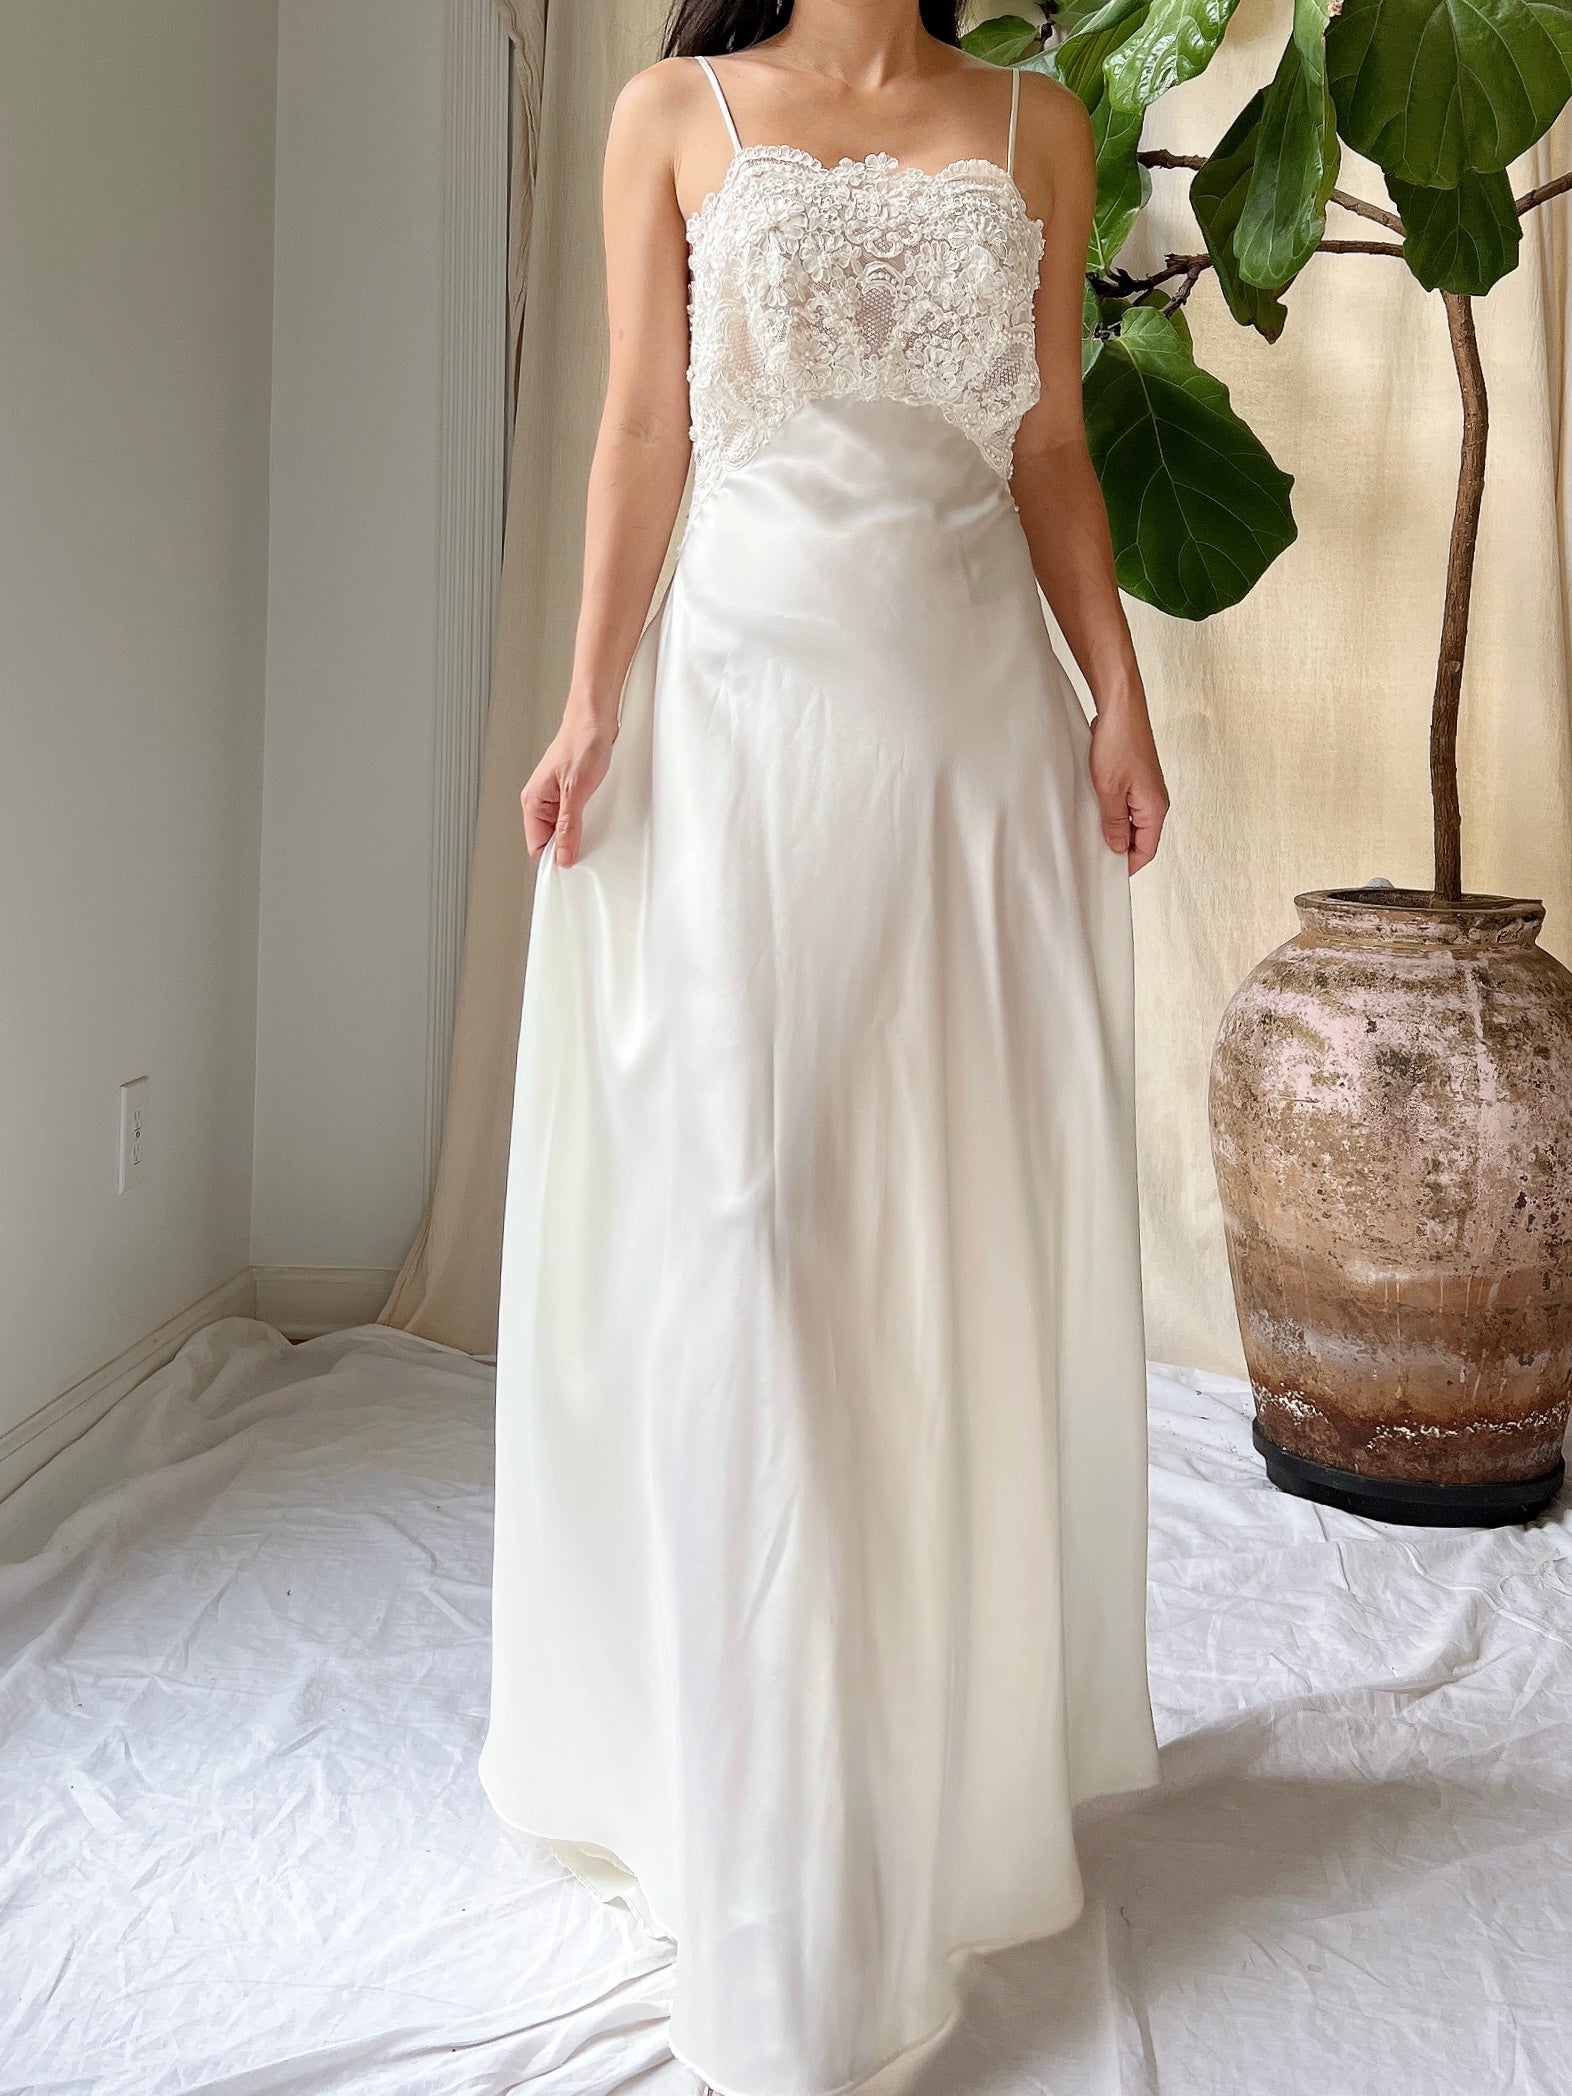 Vintage Lace and Satin Slip Gown - S